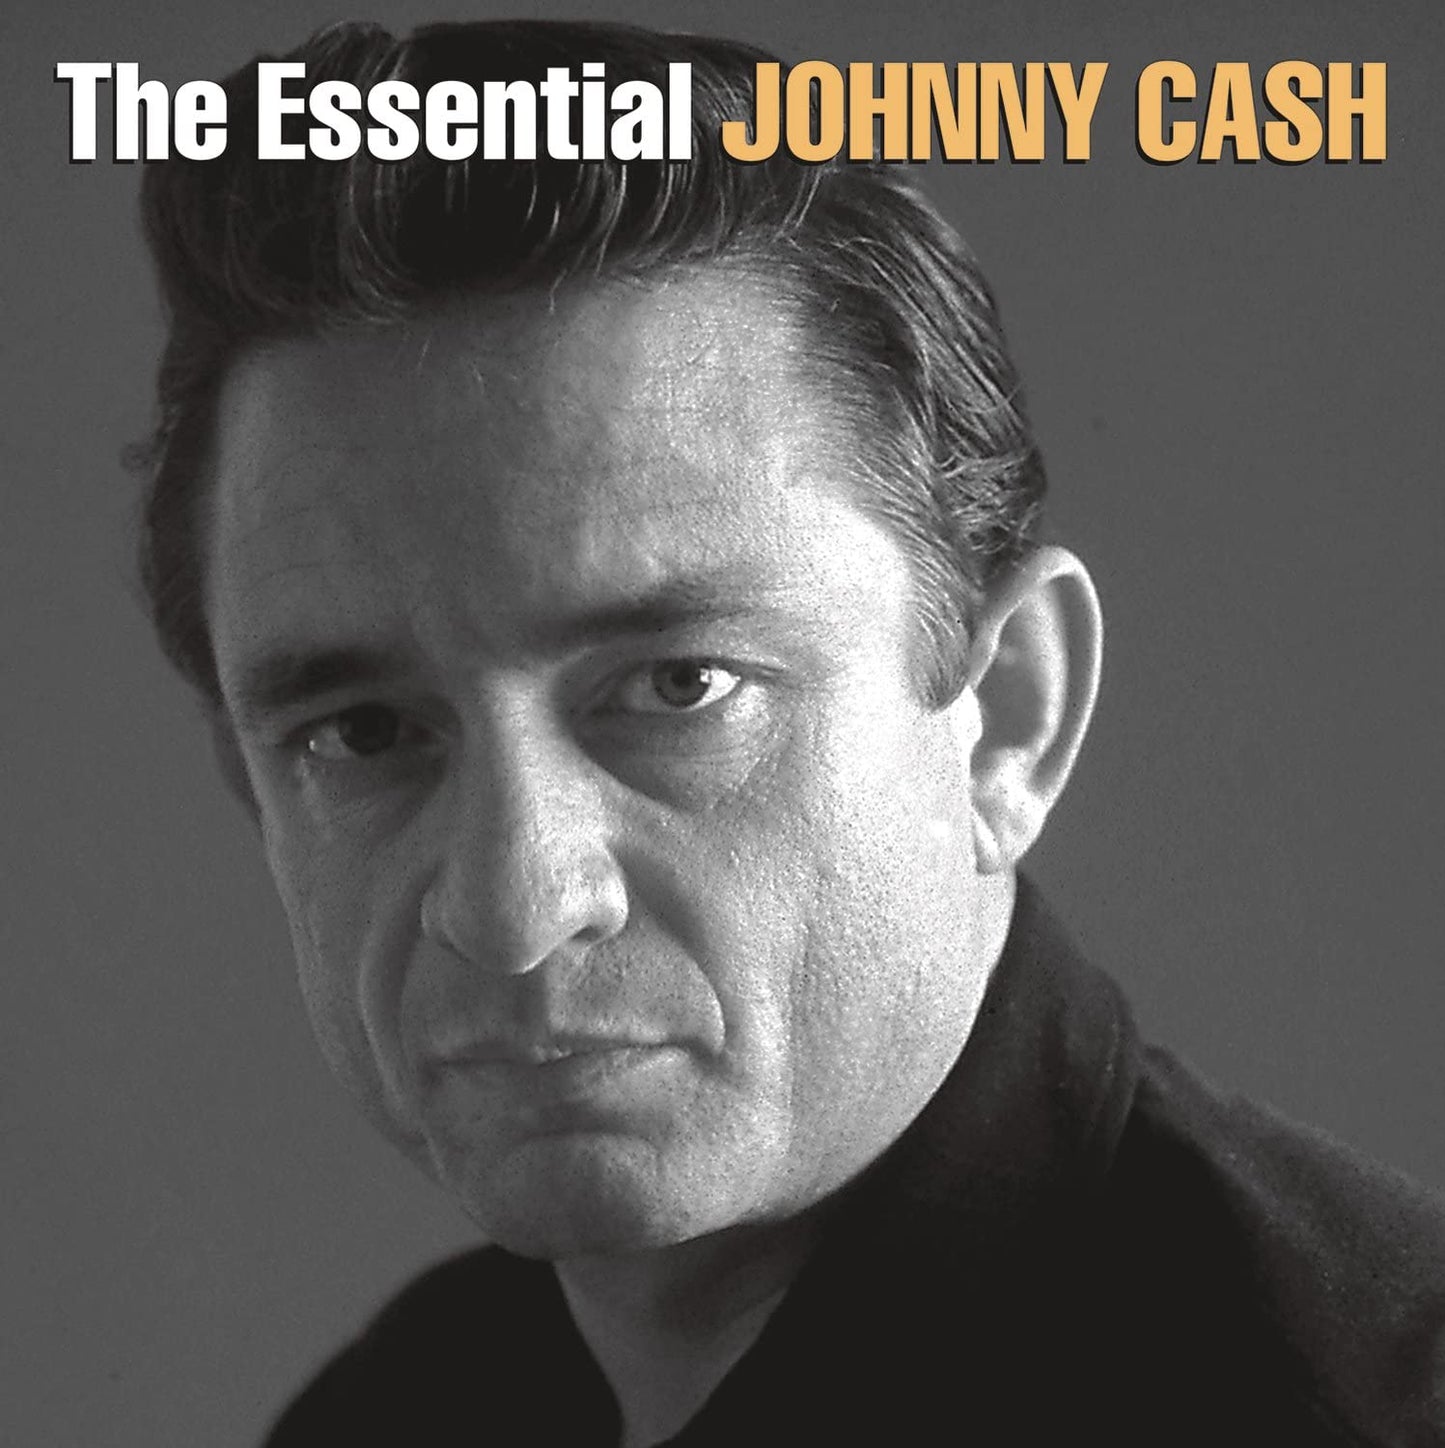 Double LP pressing featuring Essential cuts from Johnny Cash''s back catalogue, including: Ring Of Fire, Hey Porter, Folsom Prison Blues, A Boy Named Sue and many more!